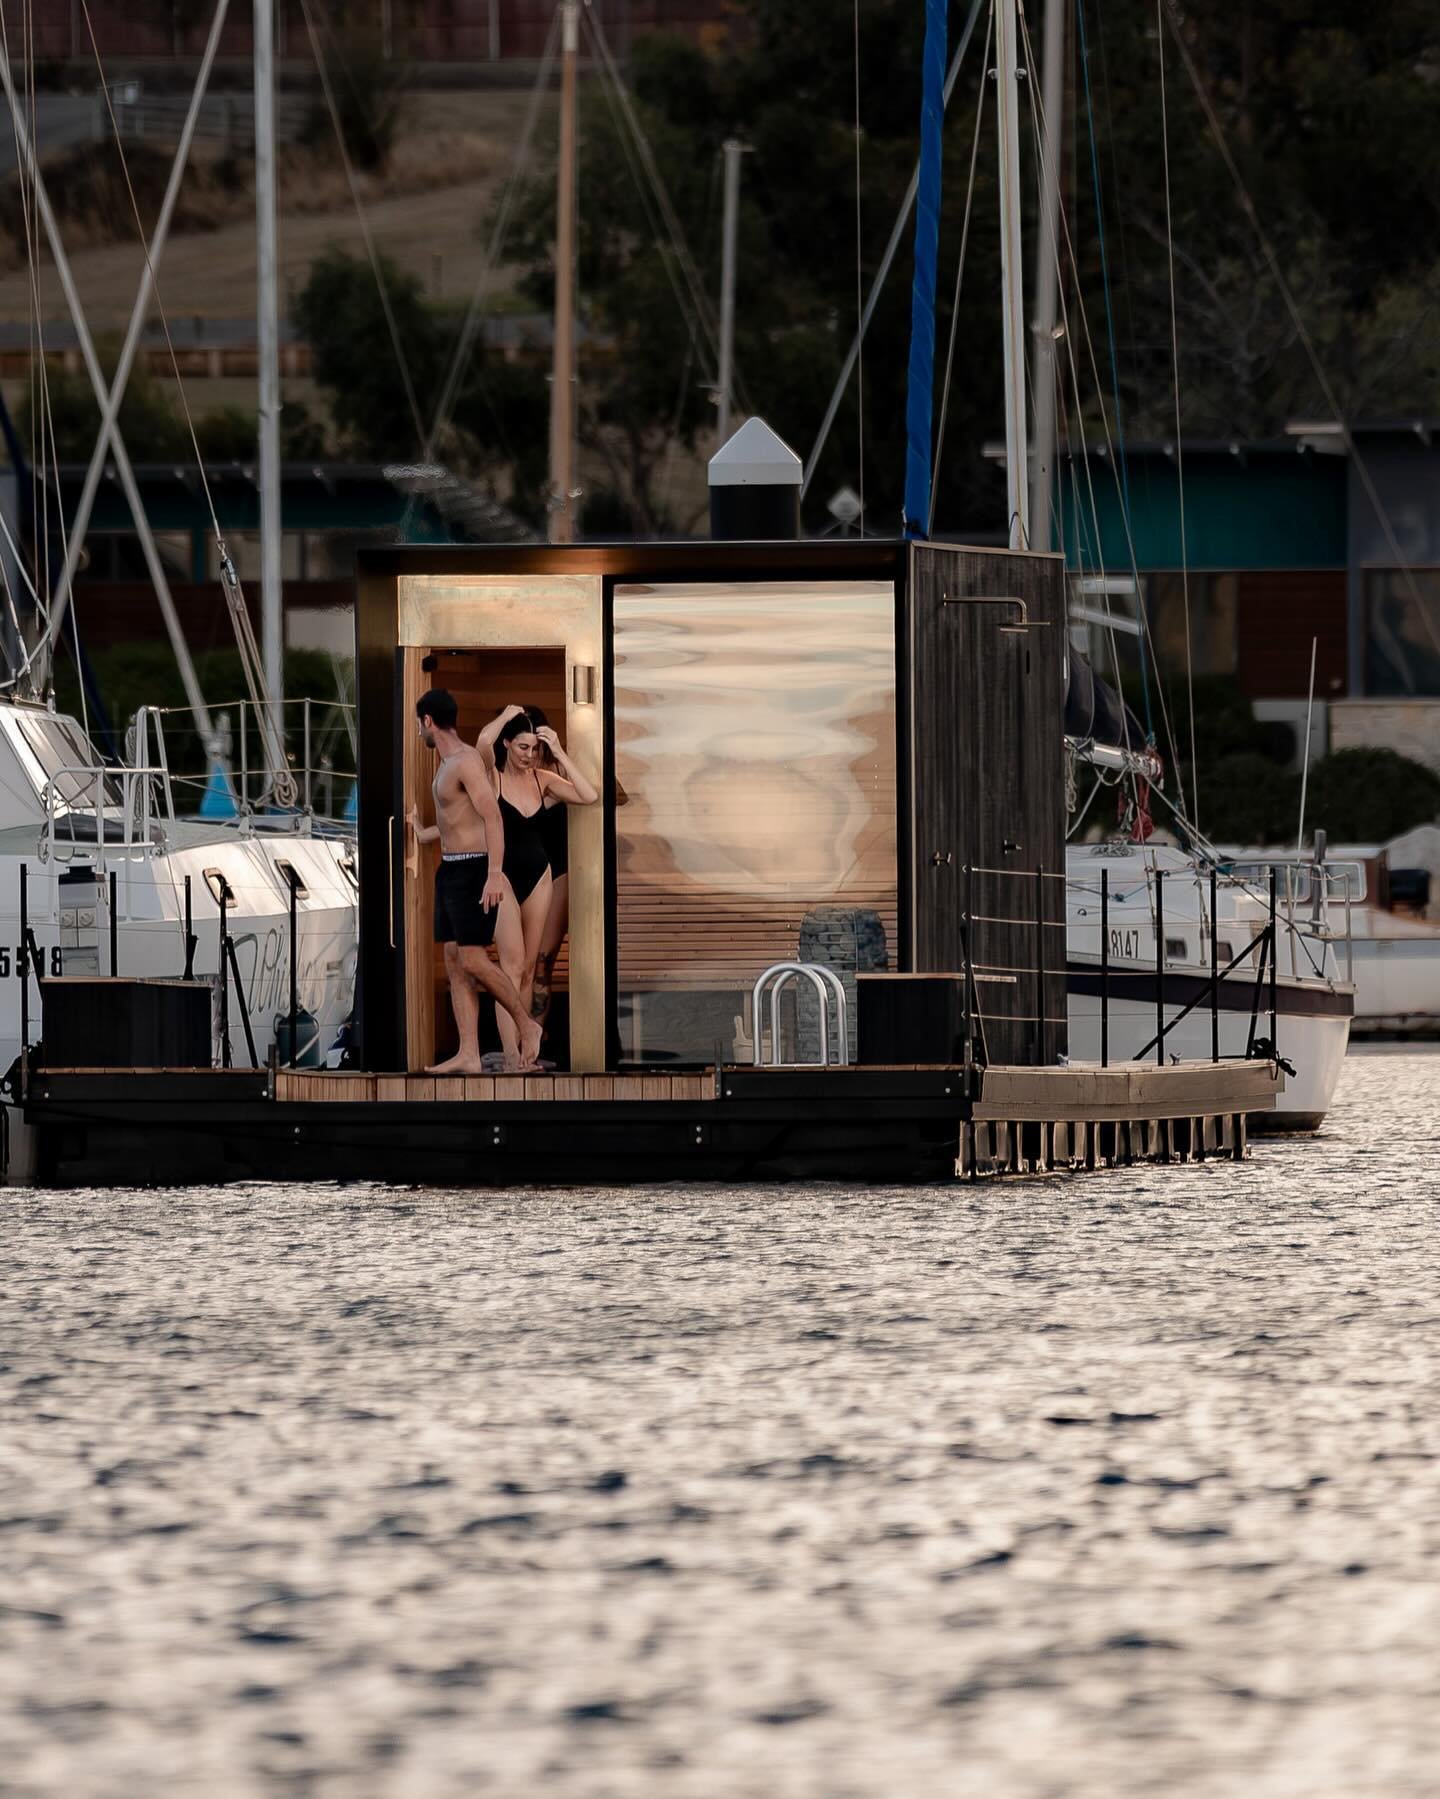 BOOKINGS NOW OPEN! 

We are thrilled to announce Sauna Boat Tasmania is officially launching and bookings are open. This marks a significant milestone for us and we can&rsquo;t wait to welcome you aboard. 

For now, we are opening bookings exclusivel